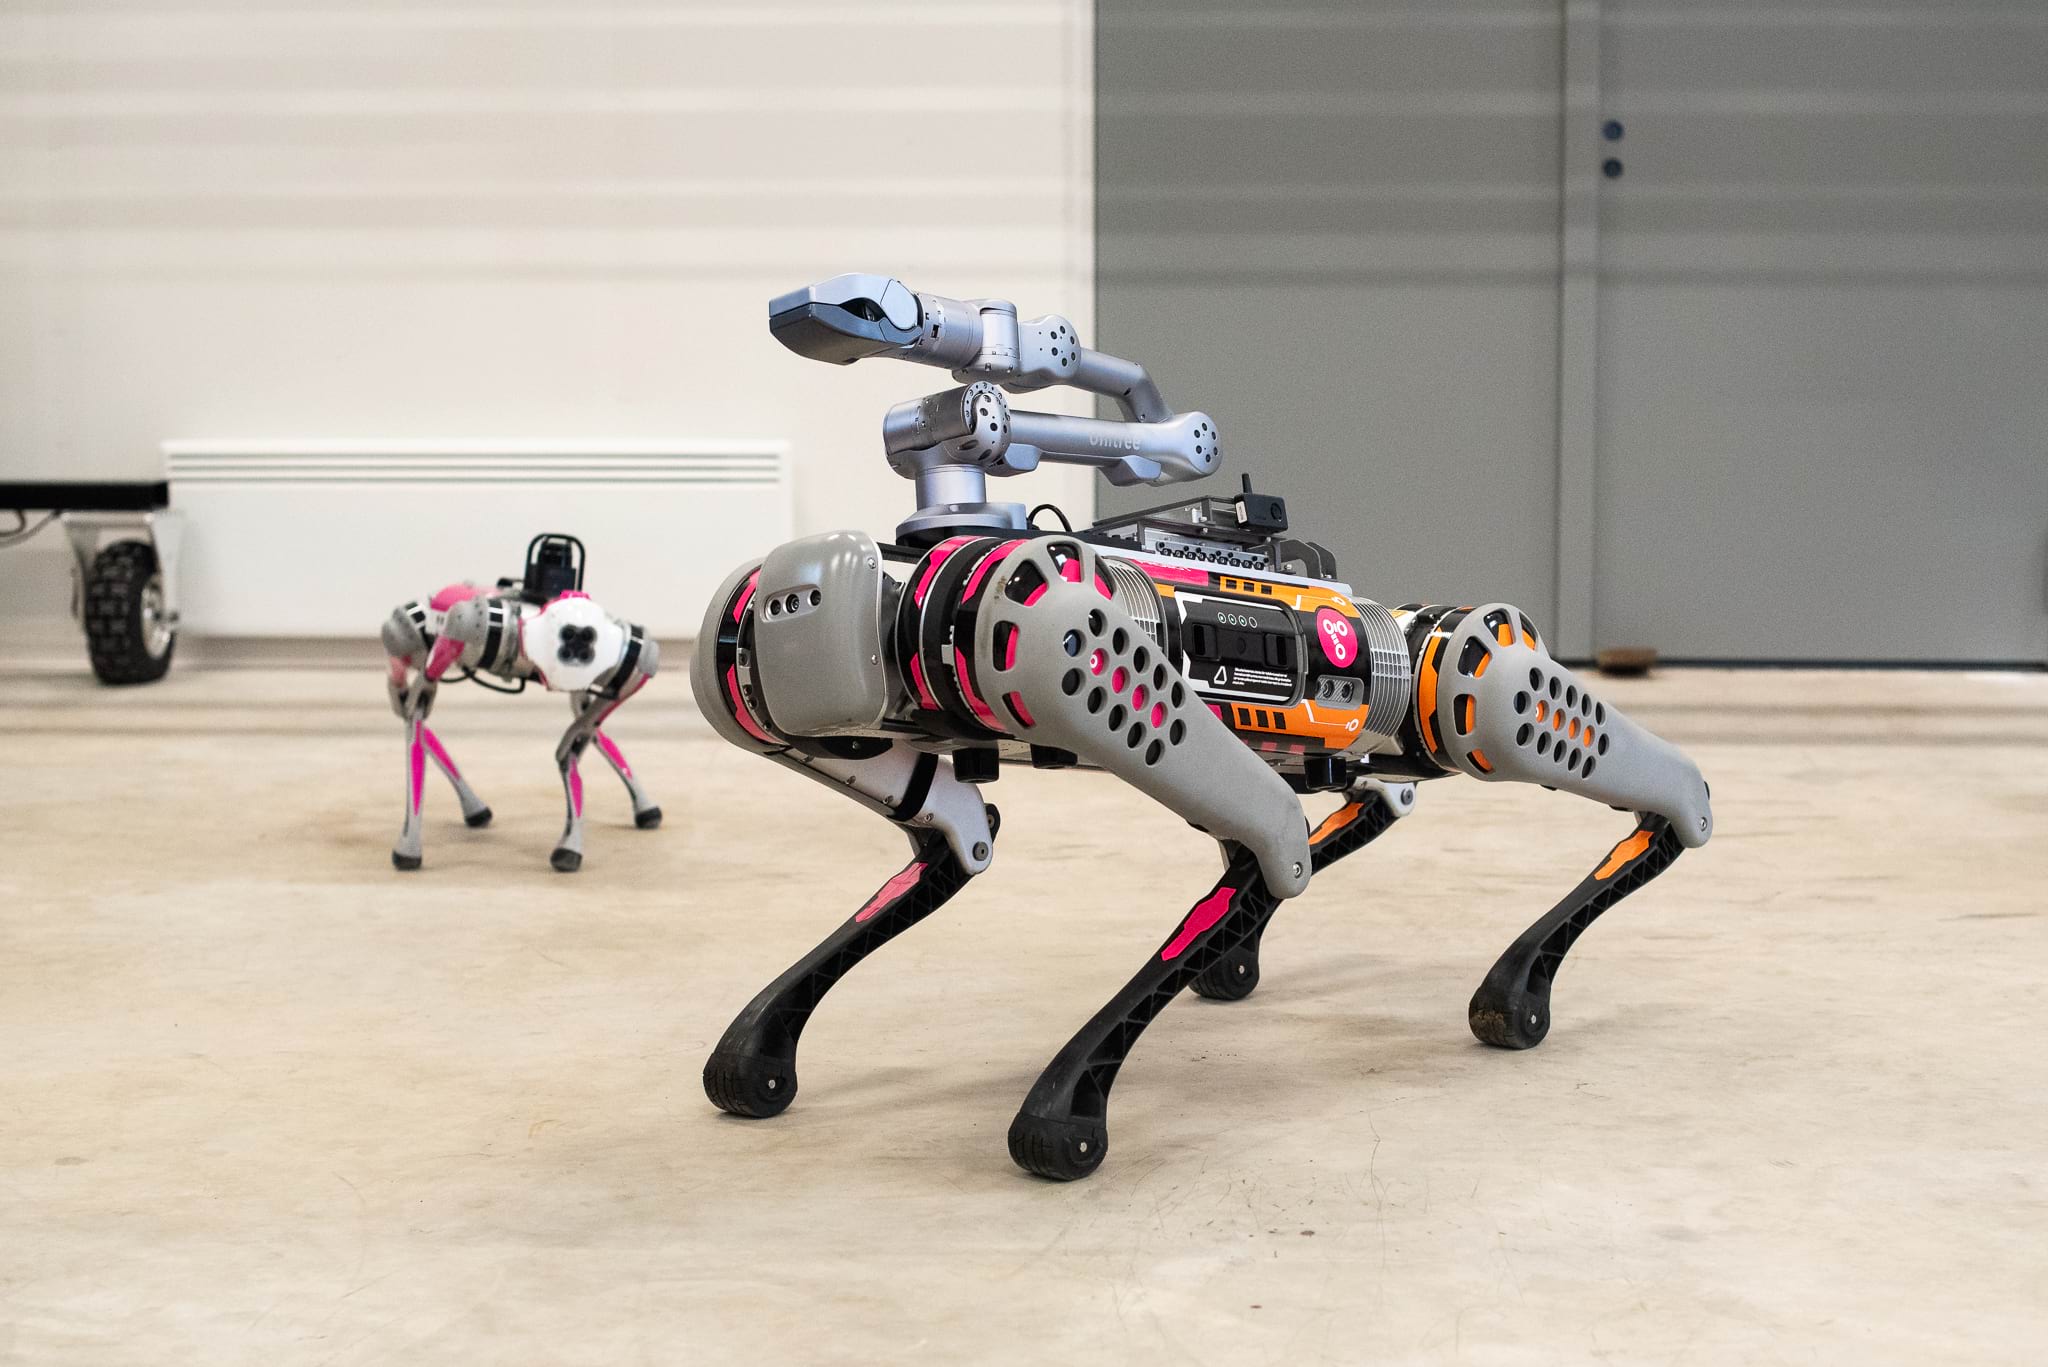 There is a big robot dog with a robotic arm in front of the picture. On the background there is a smaller robot dog.